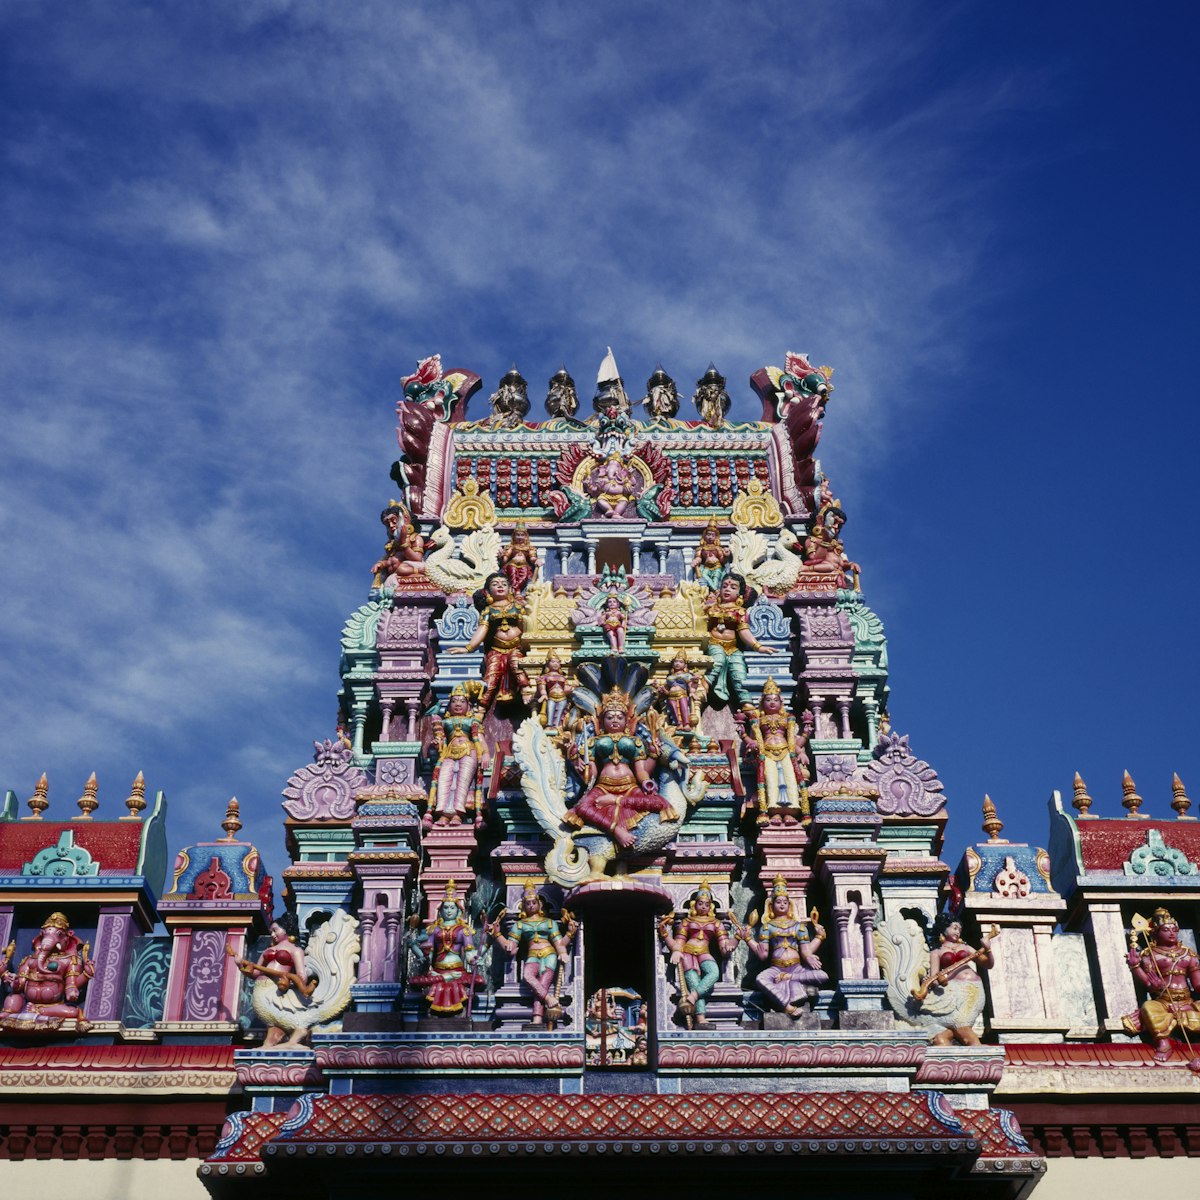 malaysia, penang, georgetown, sri mariamman temple. part view of exterior roof and gopuram painted tower decorated with brightly painted figures of hindu gods and characters.